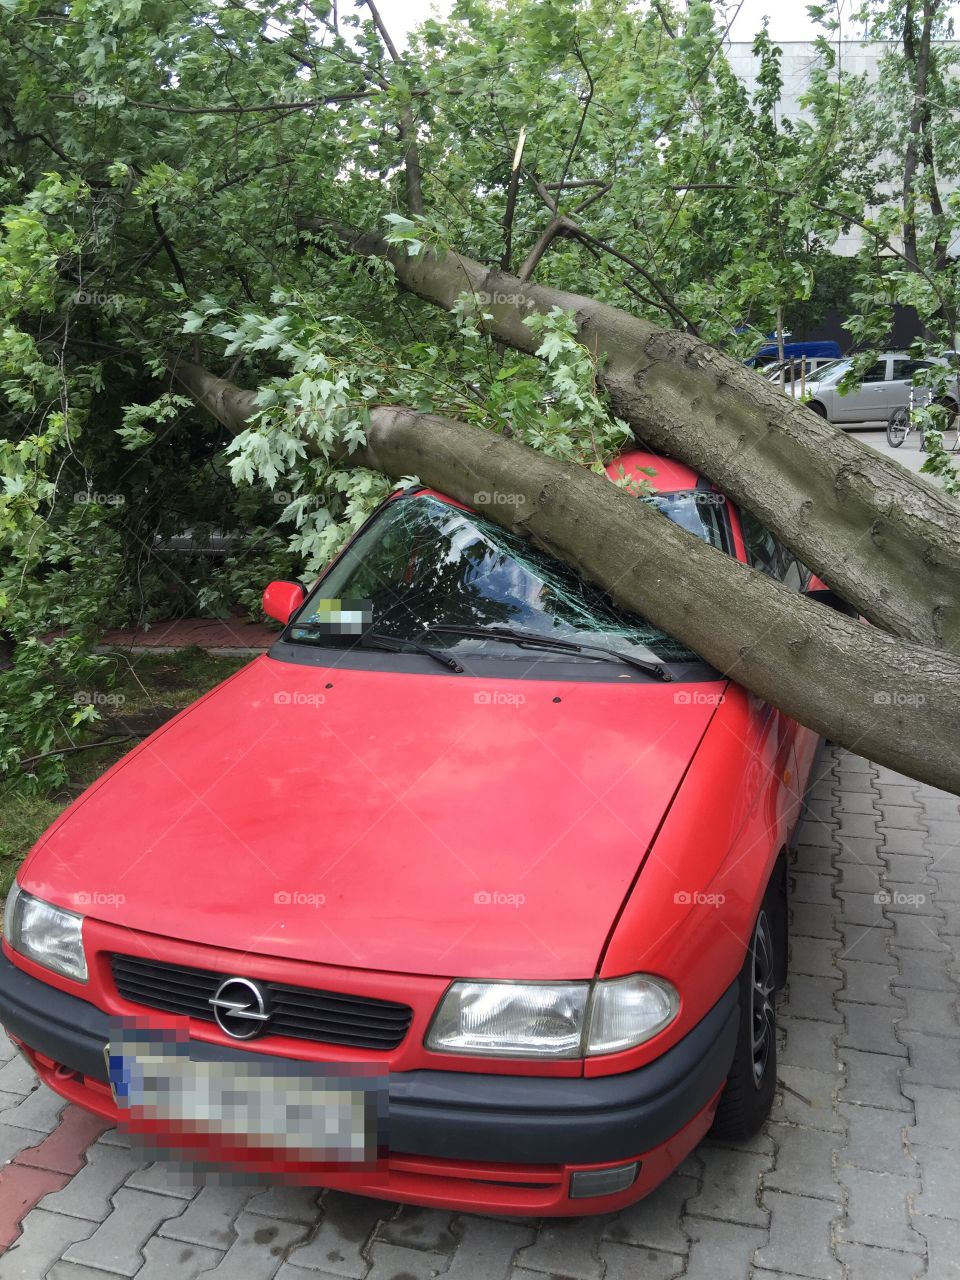 Tree Crushed The Car